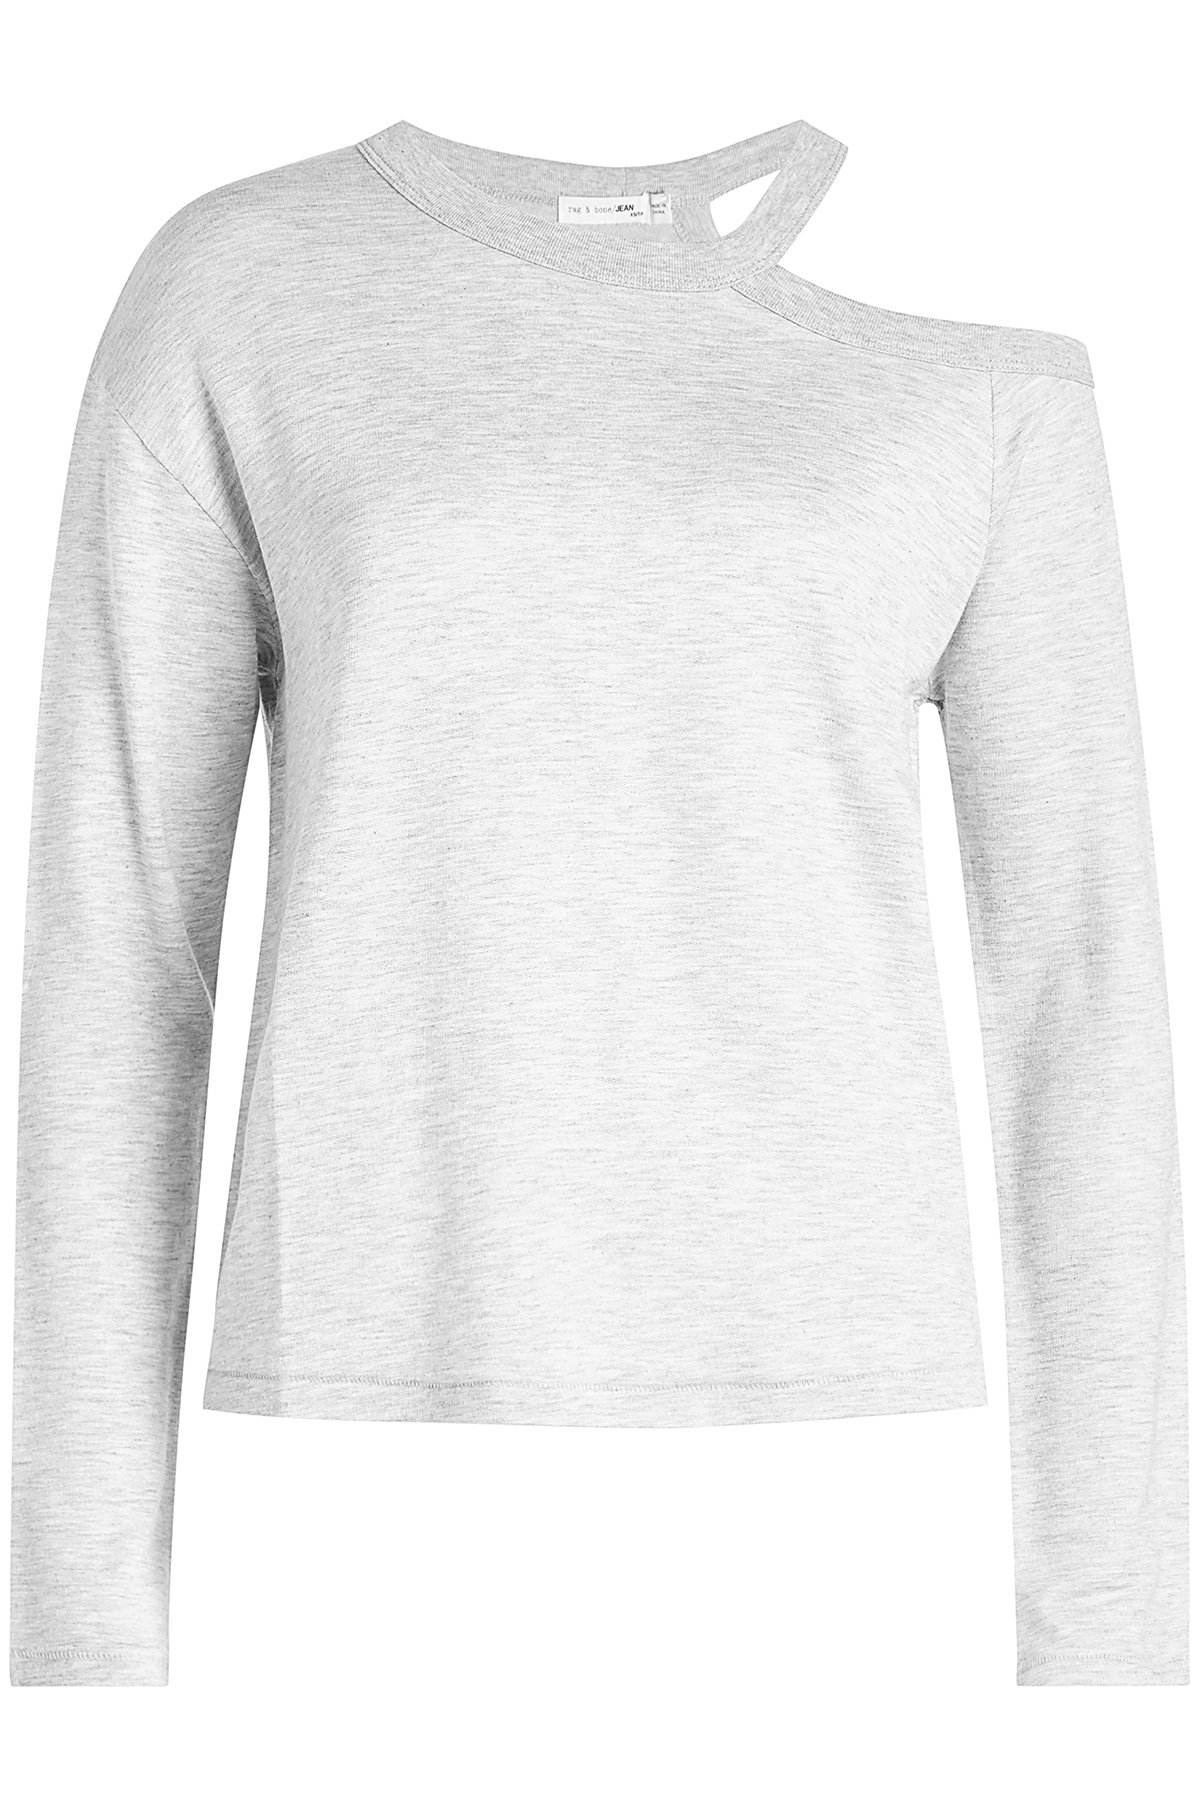 Rag & Bone - Sky Top with Cut-Out Neck